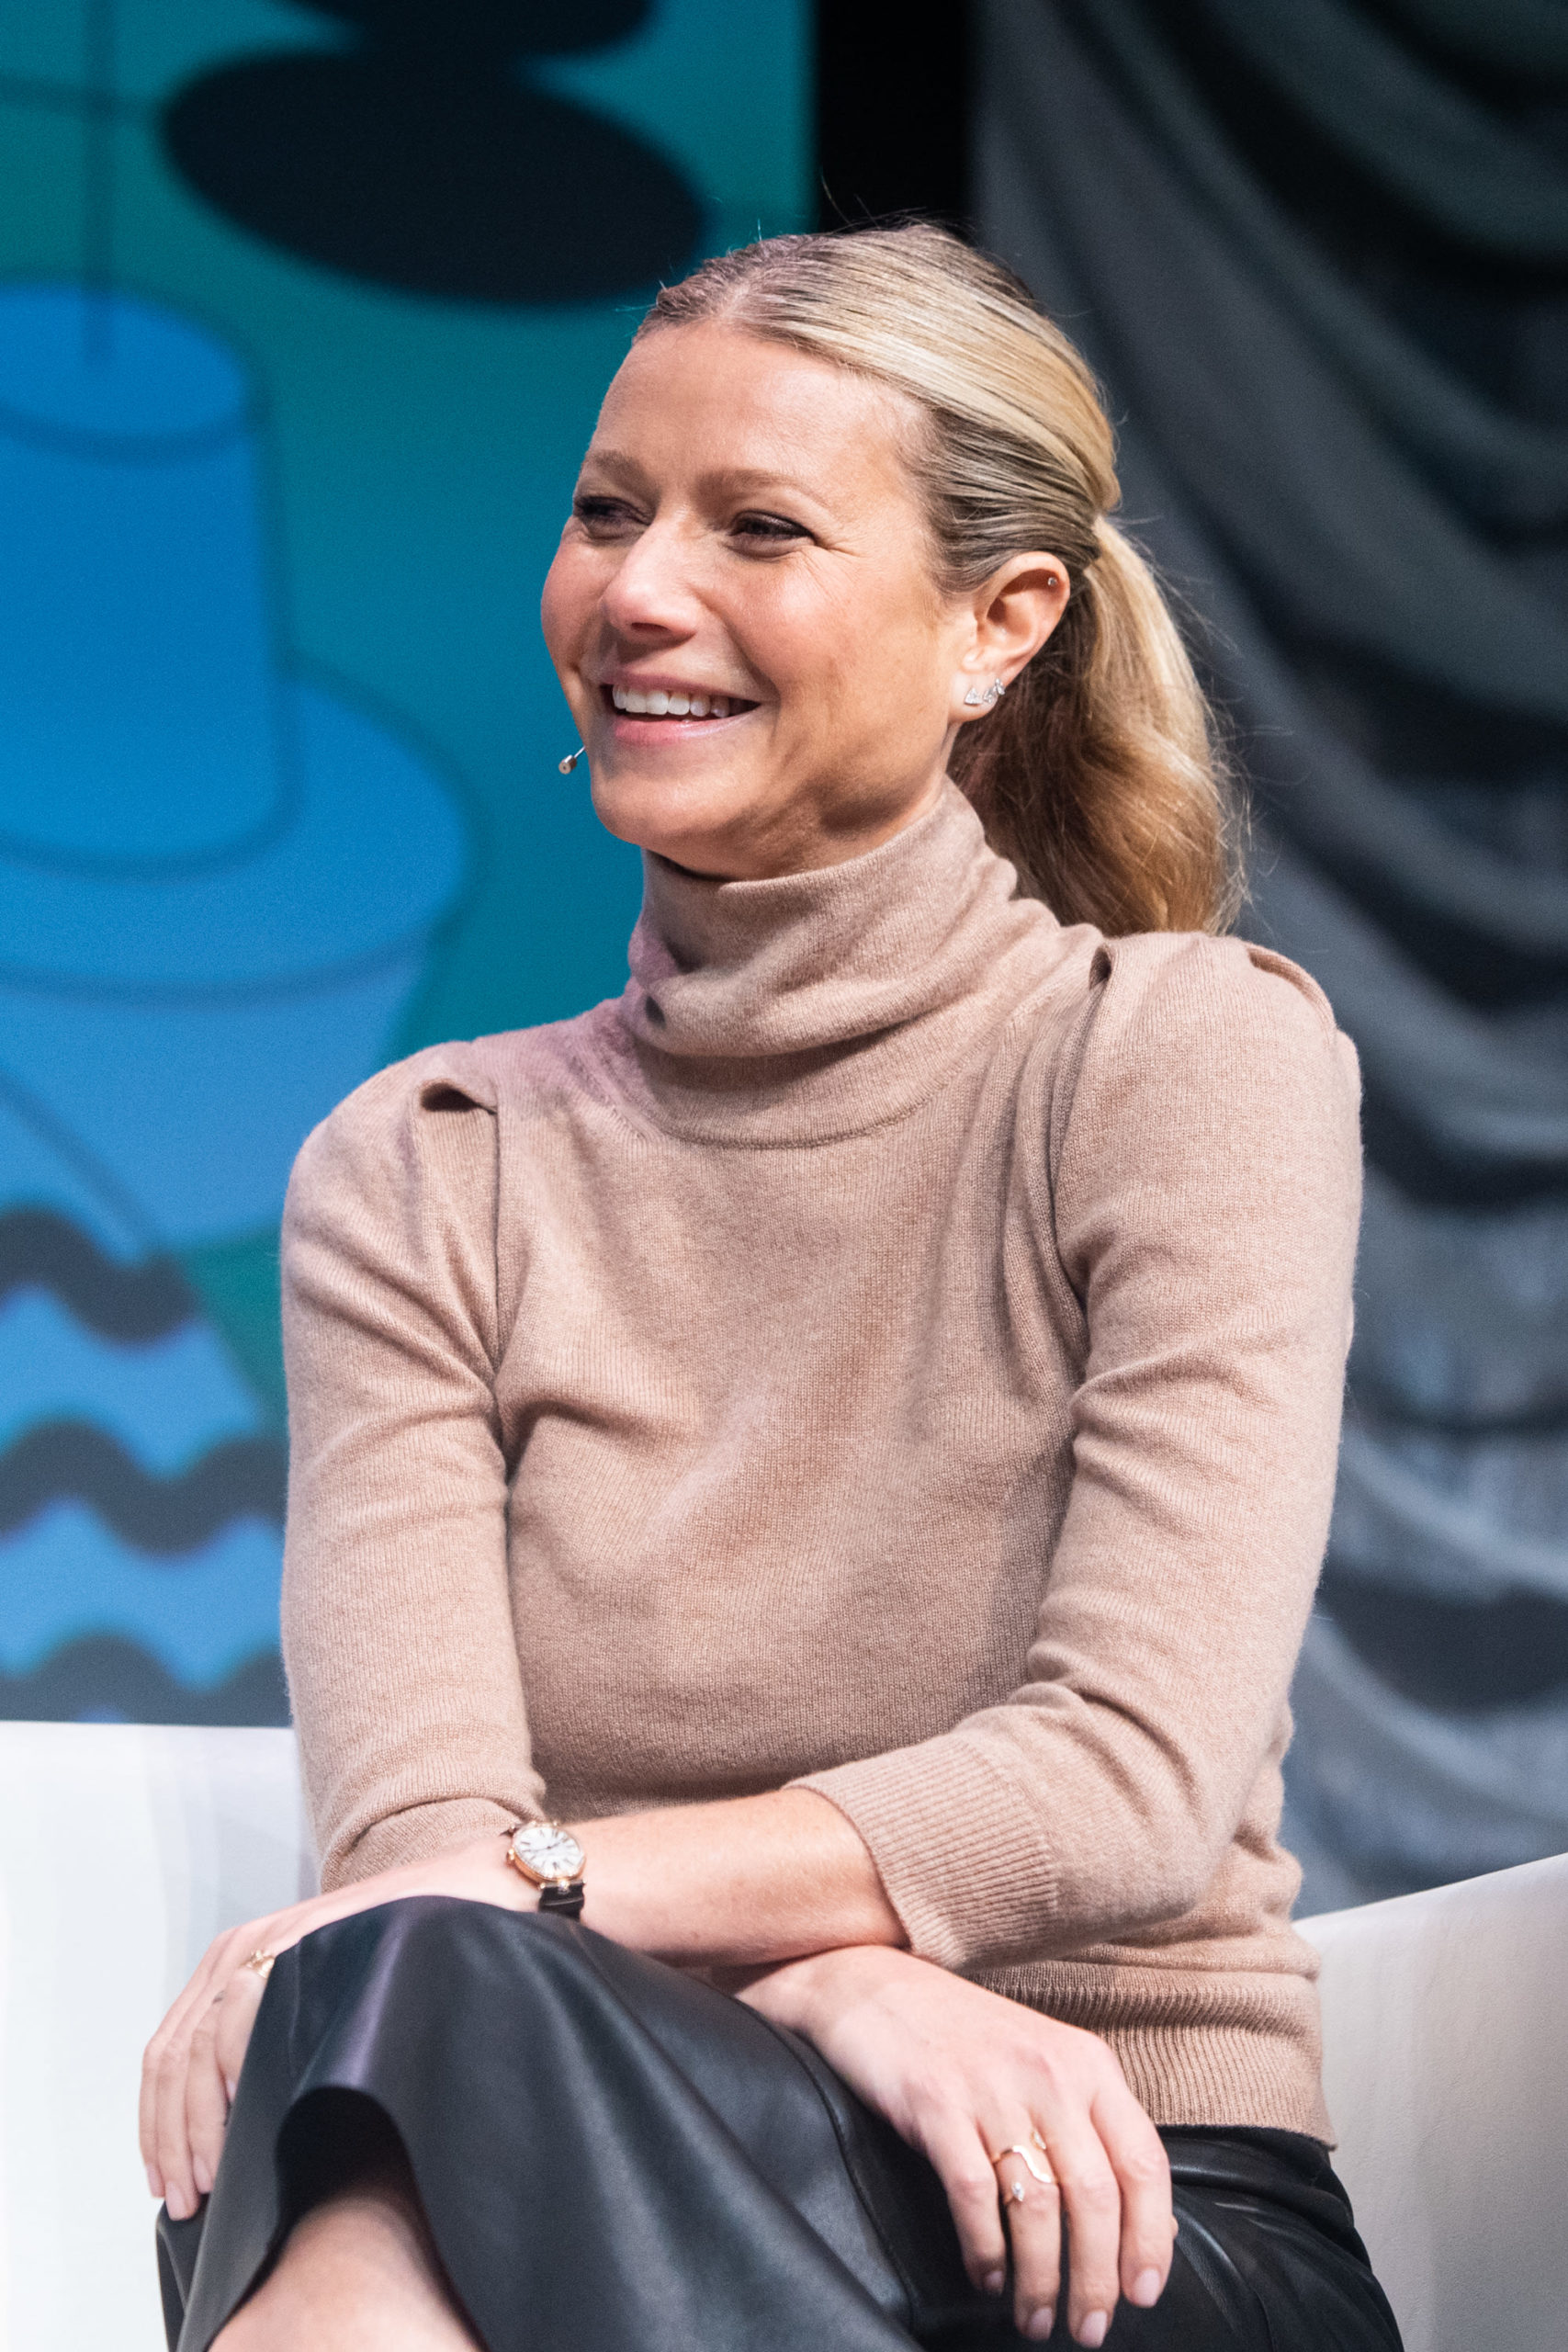 Gwyneth Paltrow’s wellness model Goop is coming to Sephora